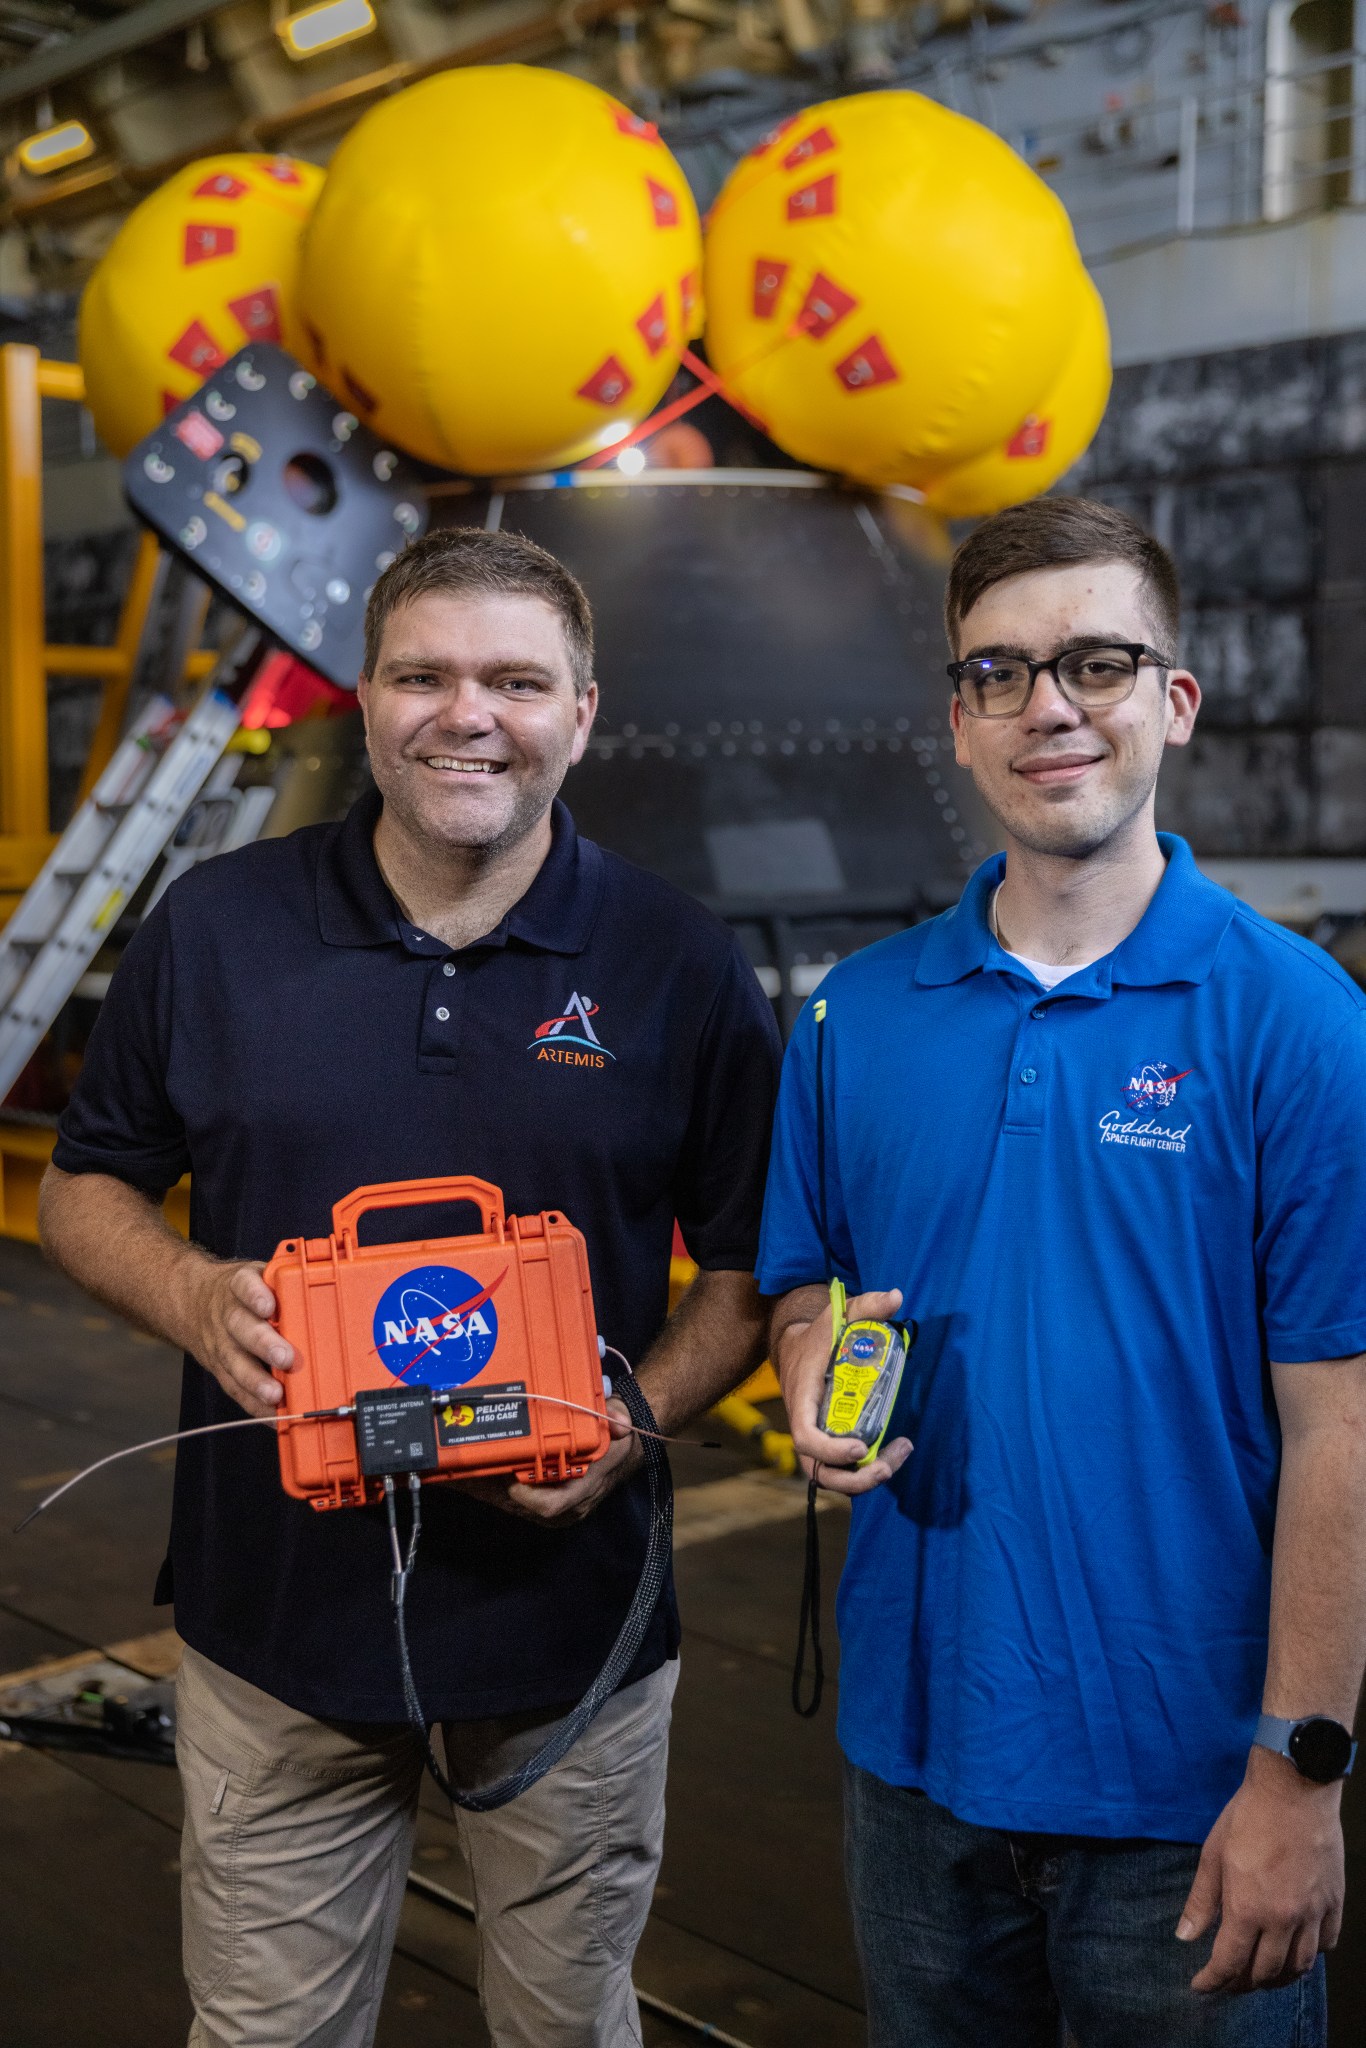 Cody Kelly and Thomas Montano from the Goddard Search and Rescue team showcasing the ANGEL beacons.